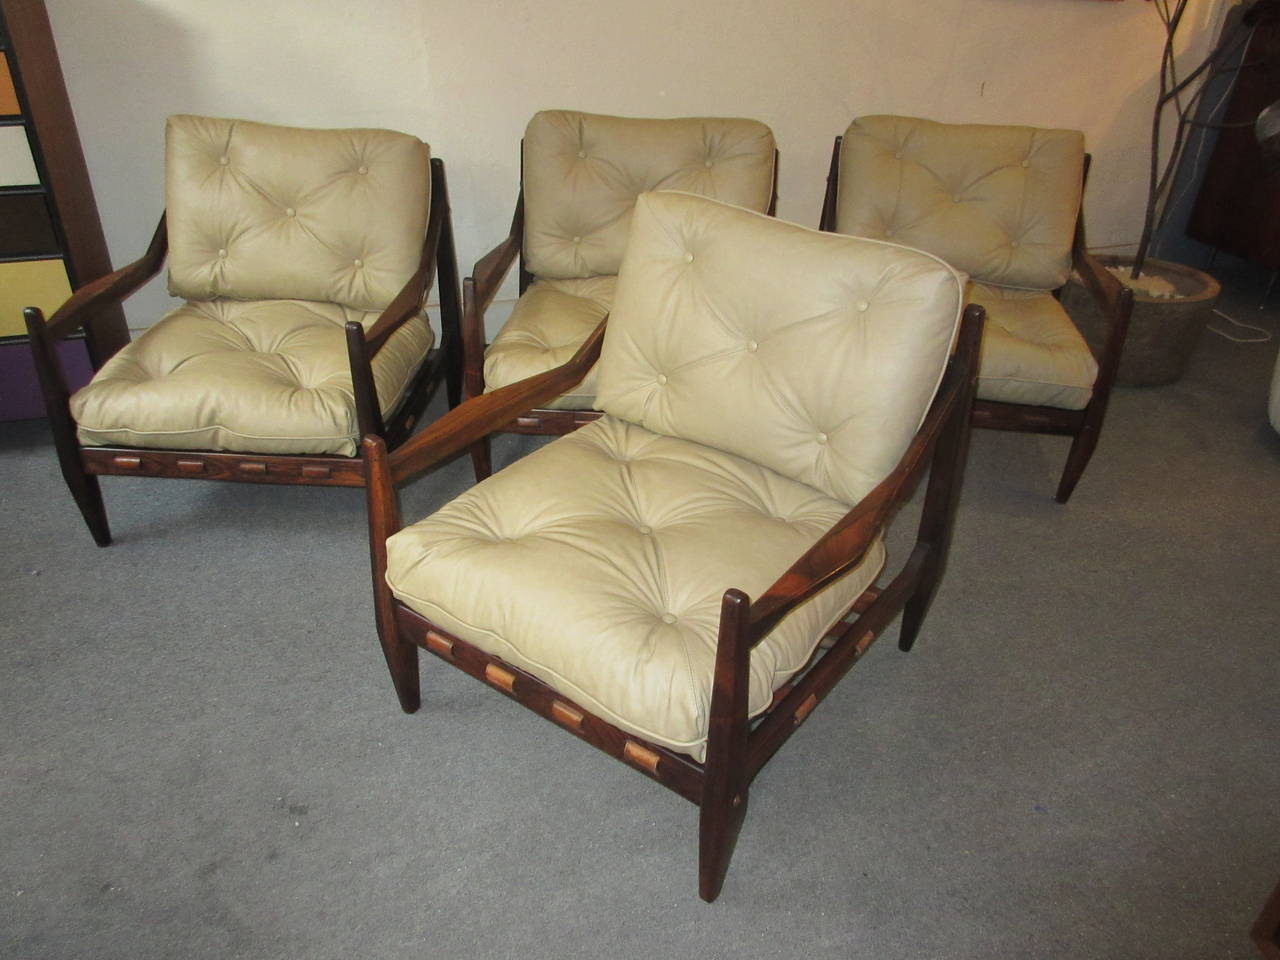 Four matching armchairs of solid jacaranda wood with new leather cushions in a very light tan done as the original in double stitched seams. Legs and arms are beautifully tapered and sculpted.